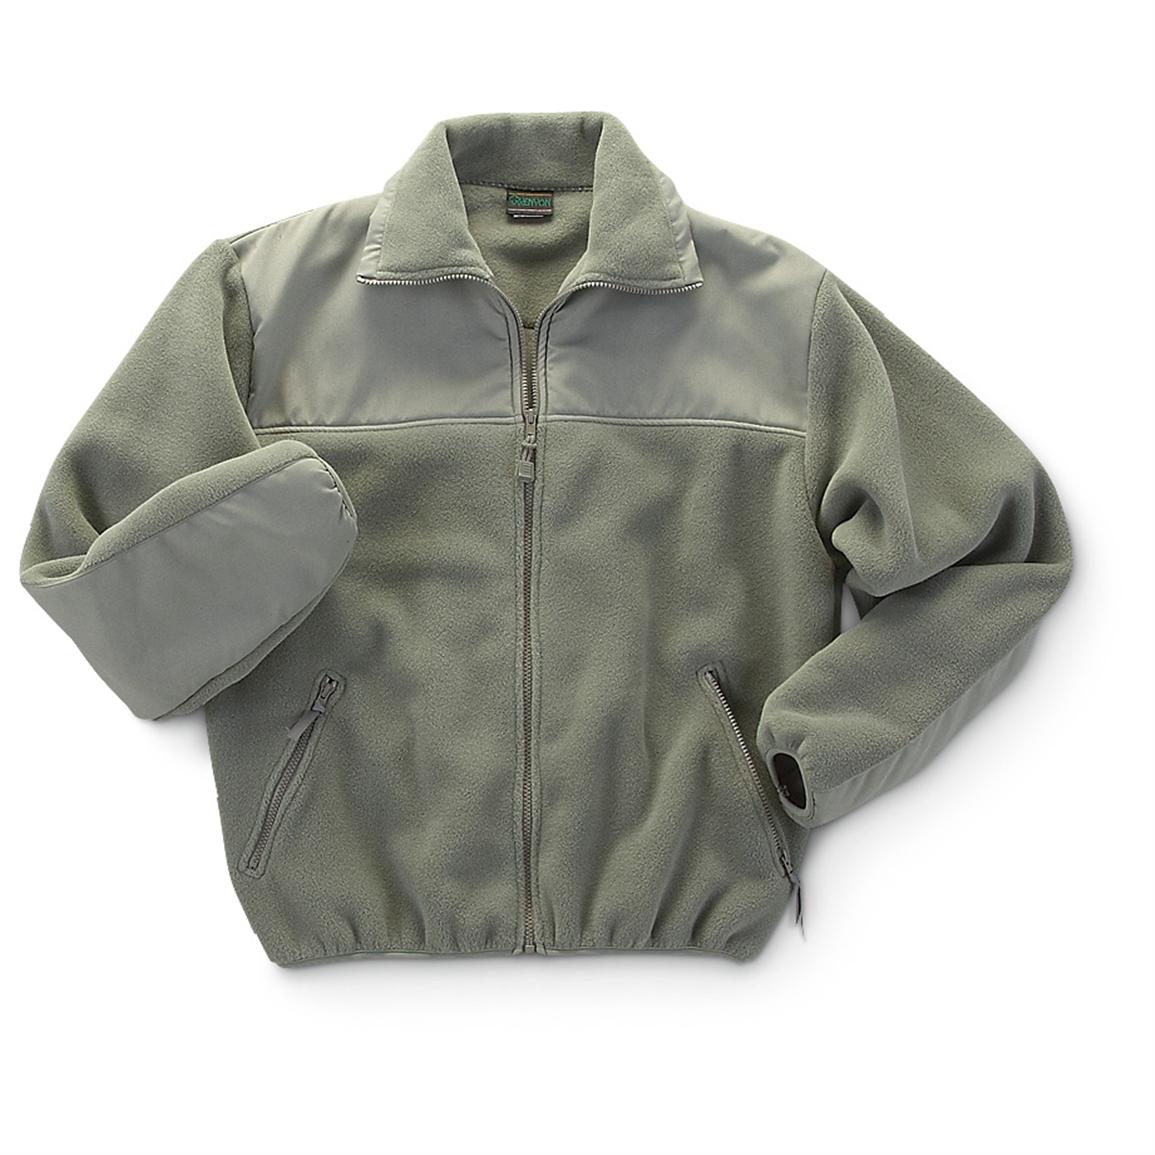 Kenyon® Polartec® Mil. - spec Jacket - 206408, Insulated Jackets & Coats at Sportsman's Guide